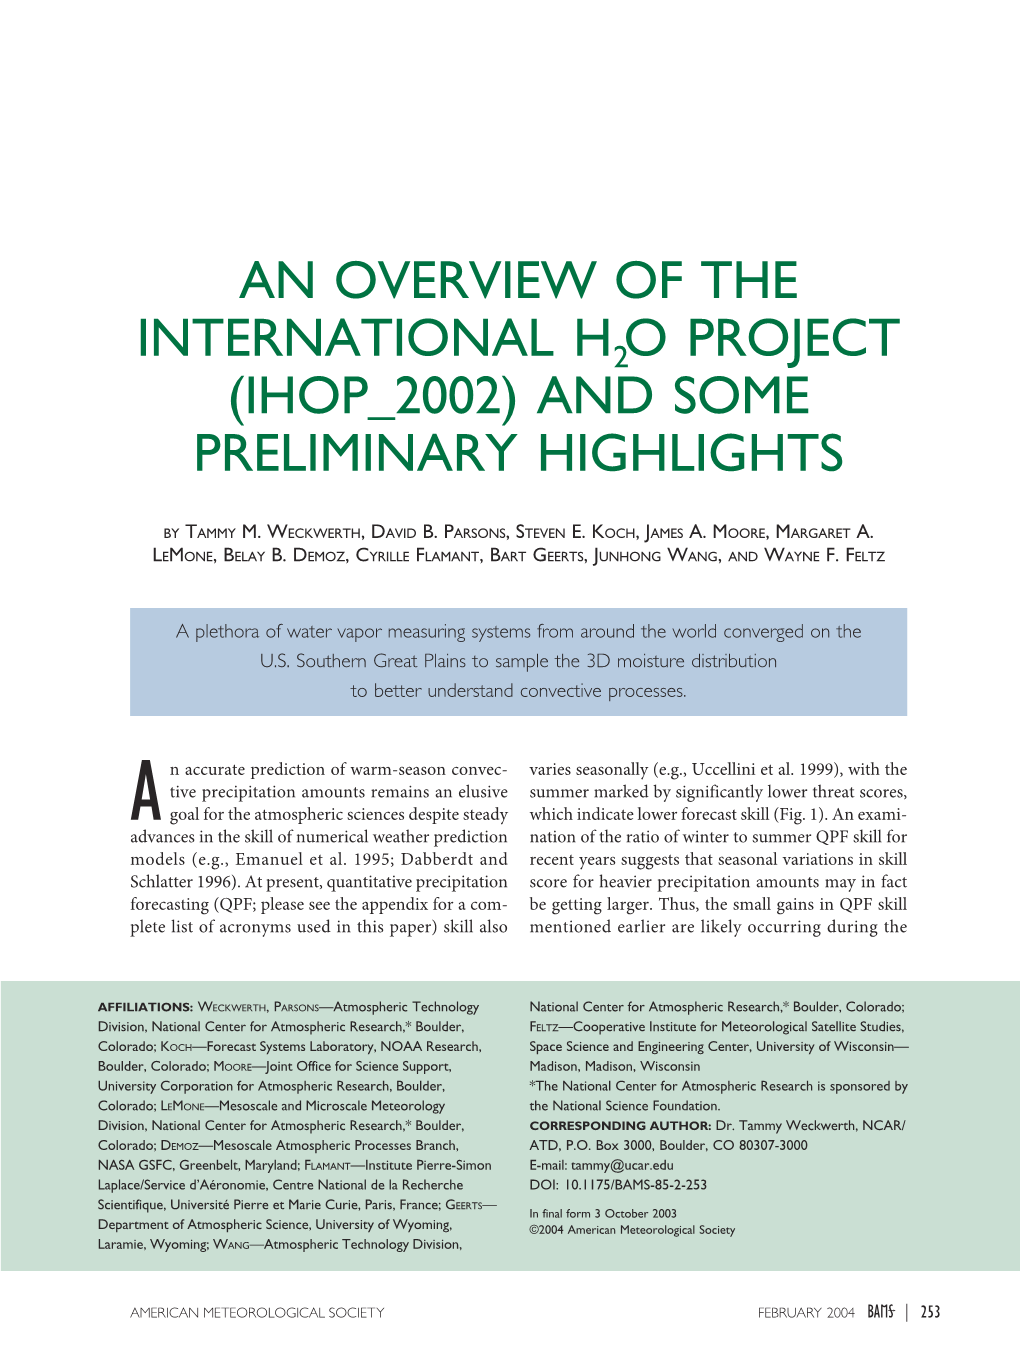 An Overview of the International H2 O Project